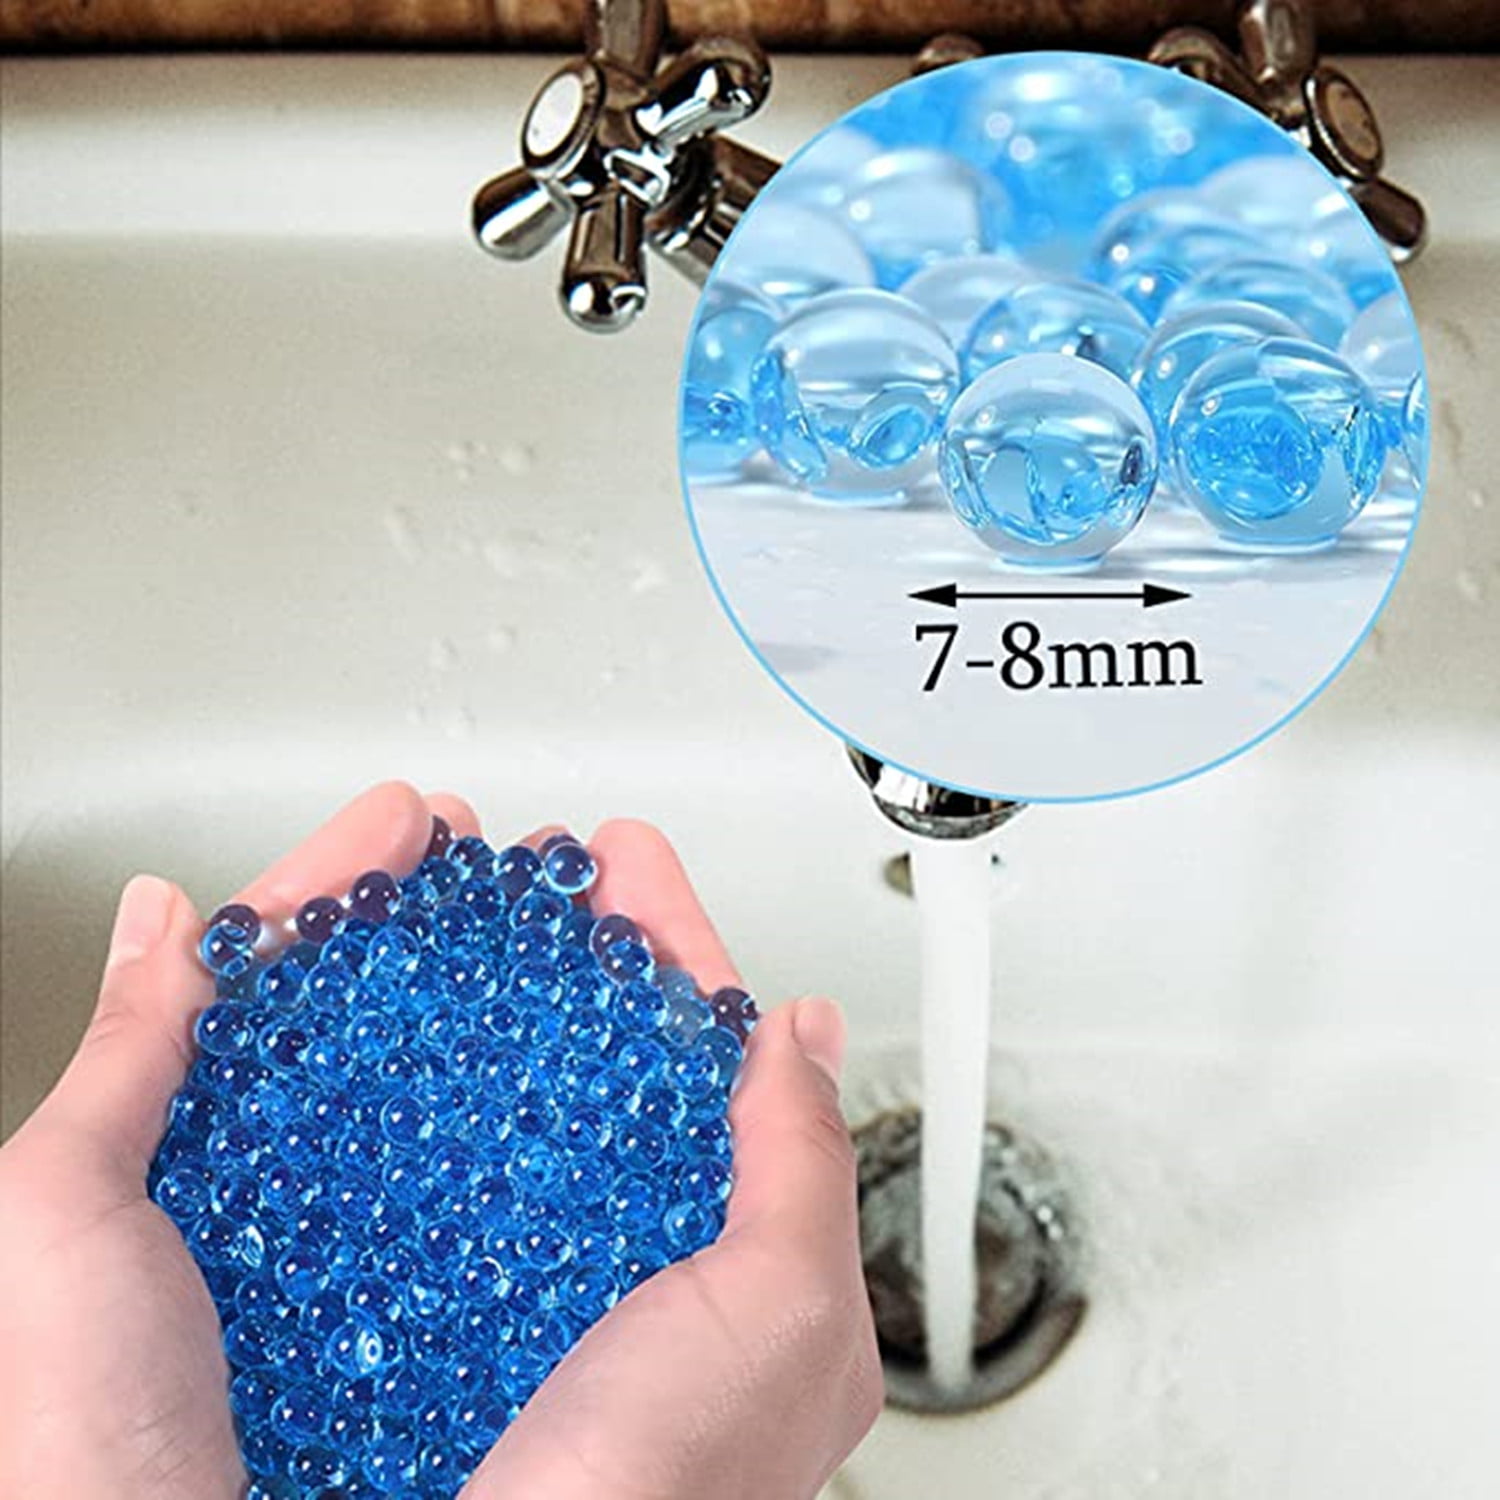 Richgv 60000(7-8 mm) Water Ball Toy Refill Ammo, Water Balls Beads for Kids  aged 6-18 